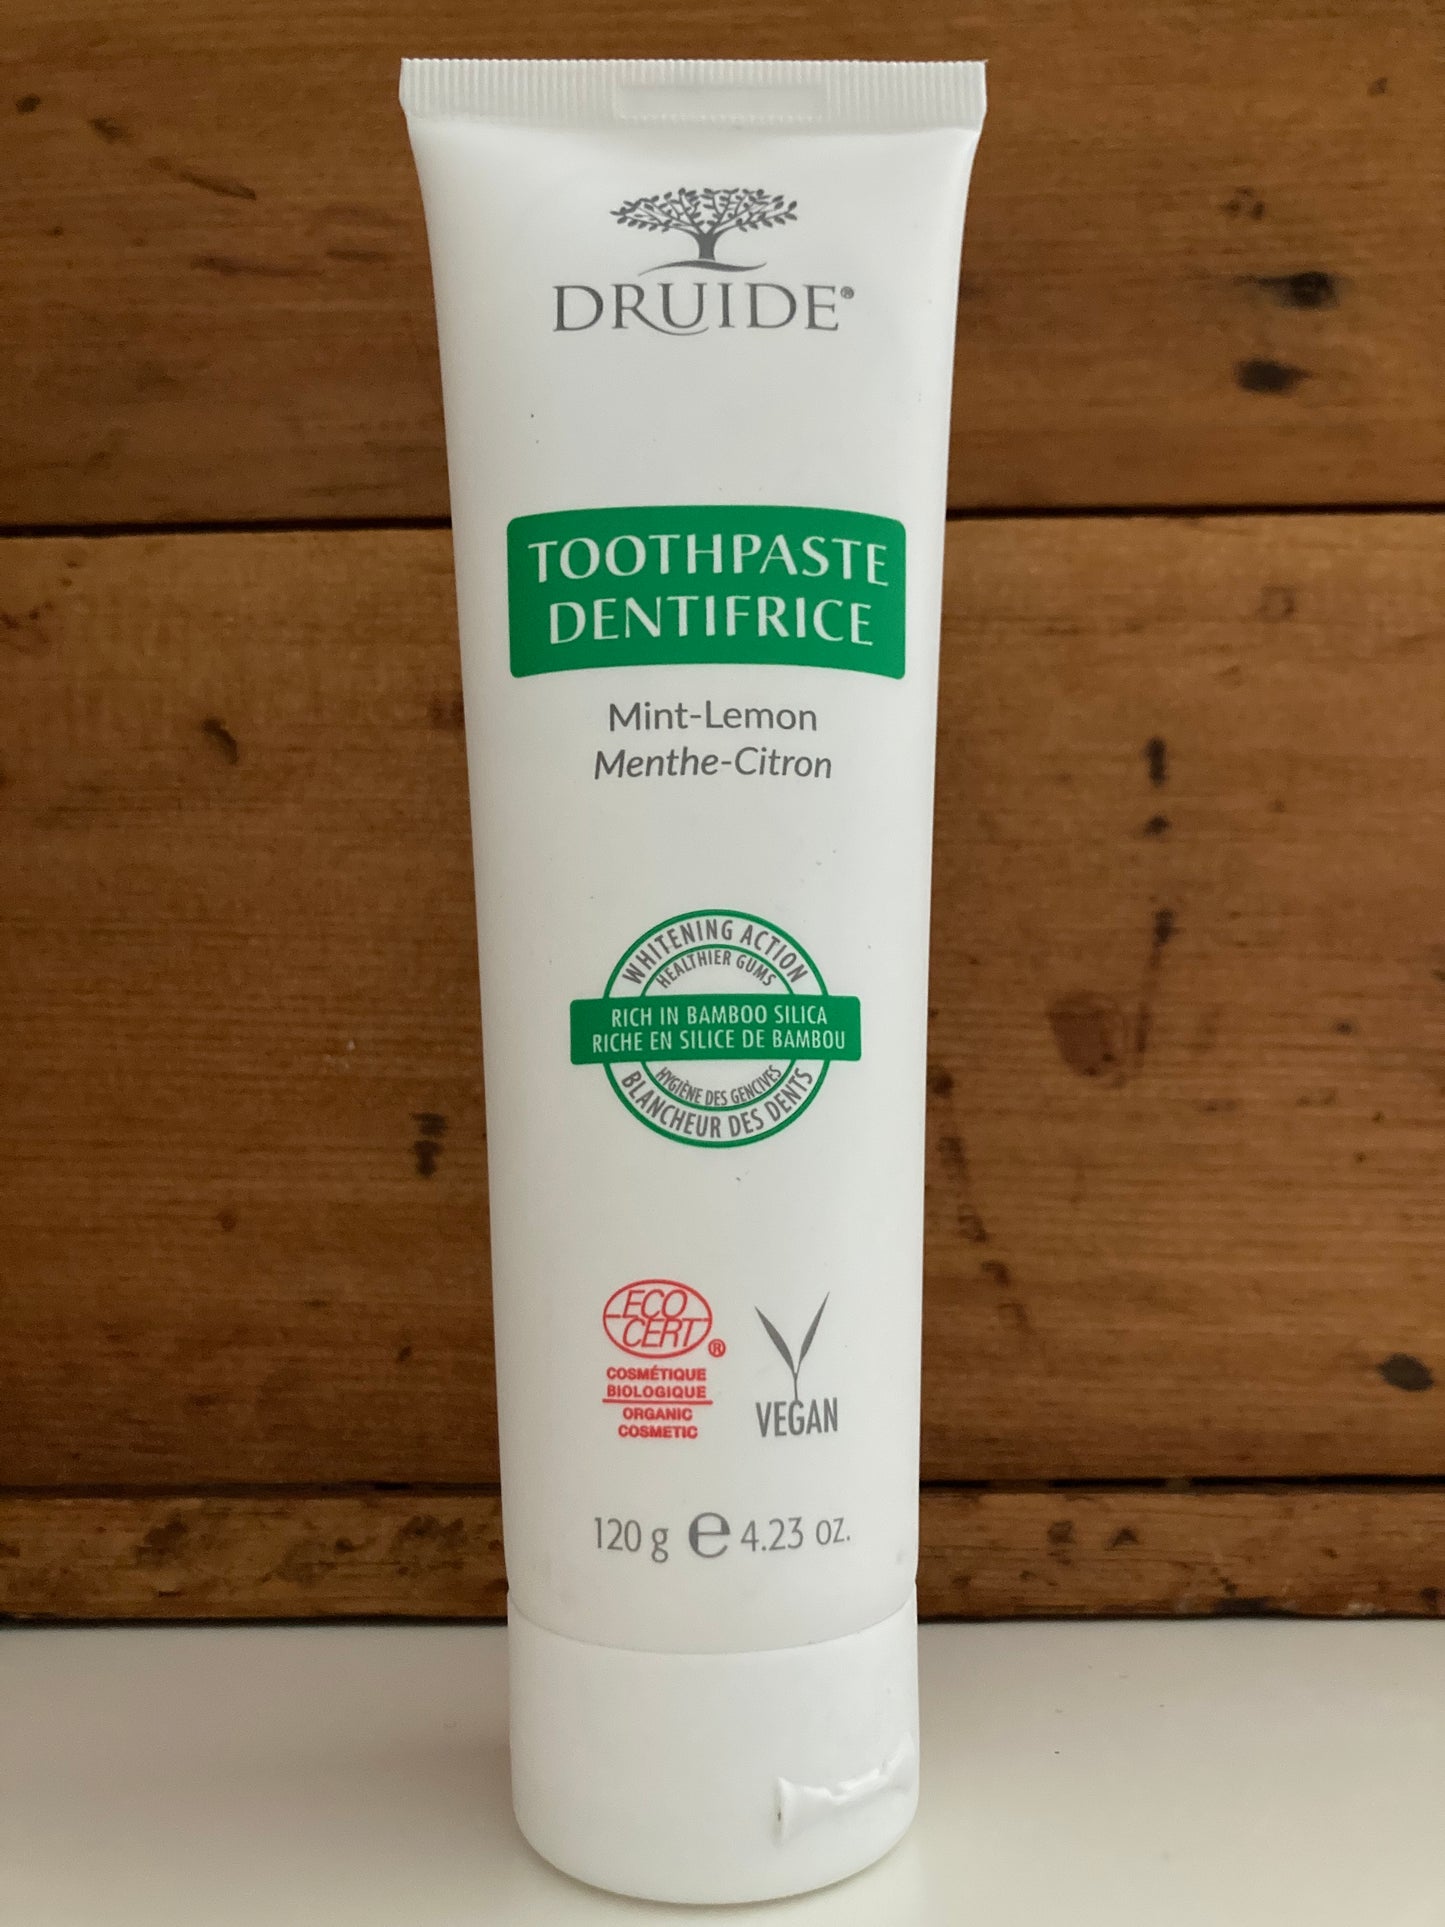 Holistic by Druide - TOOTHPASTE, Anise/Mint-Lemon